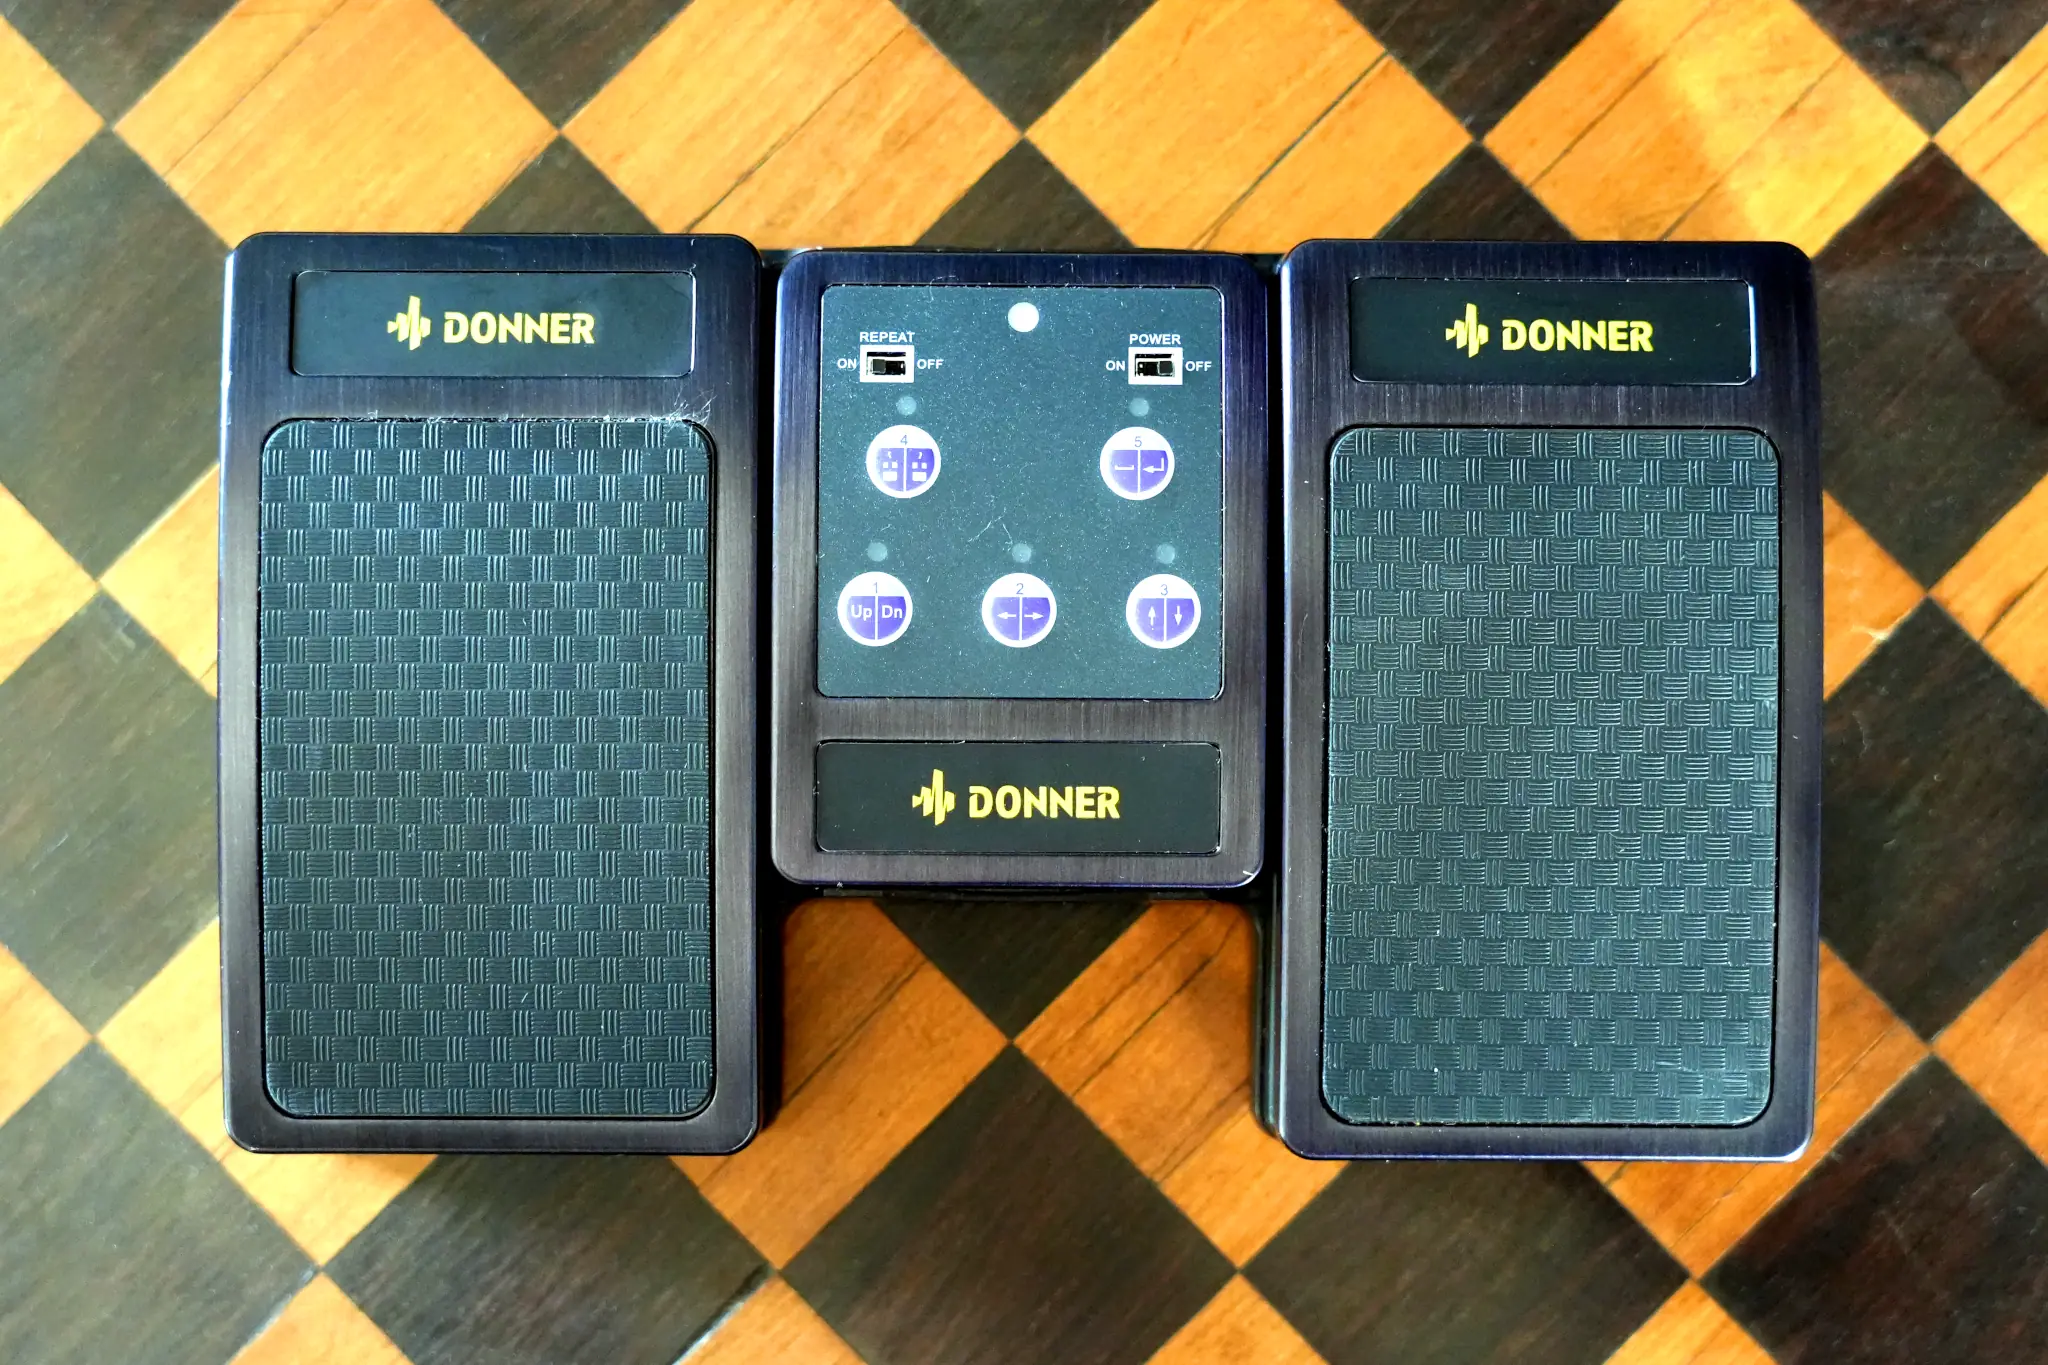 Donner Bluetooth foot swith (Pedal) for turning pages or scrolling